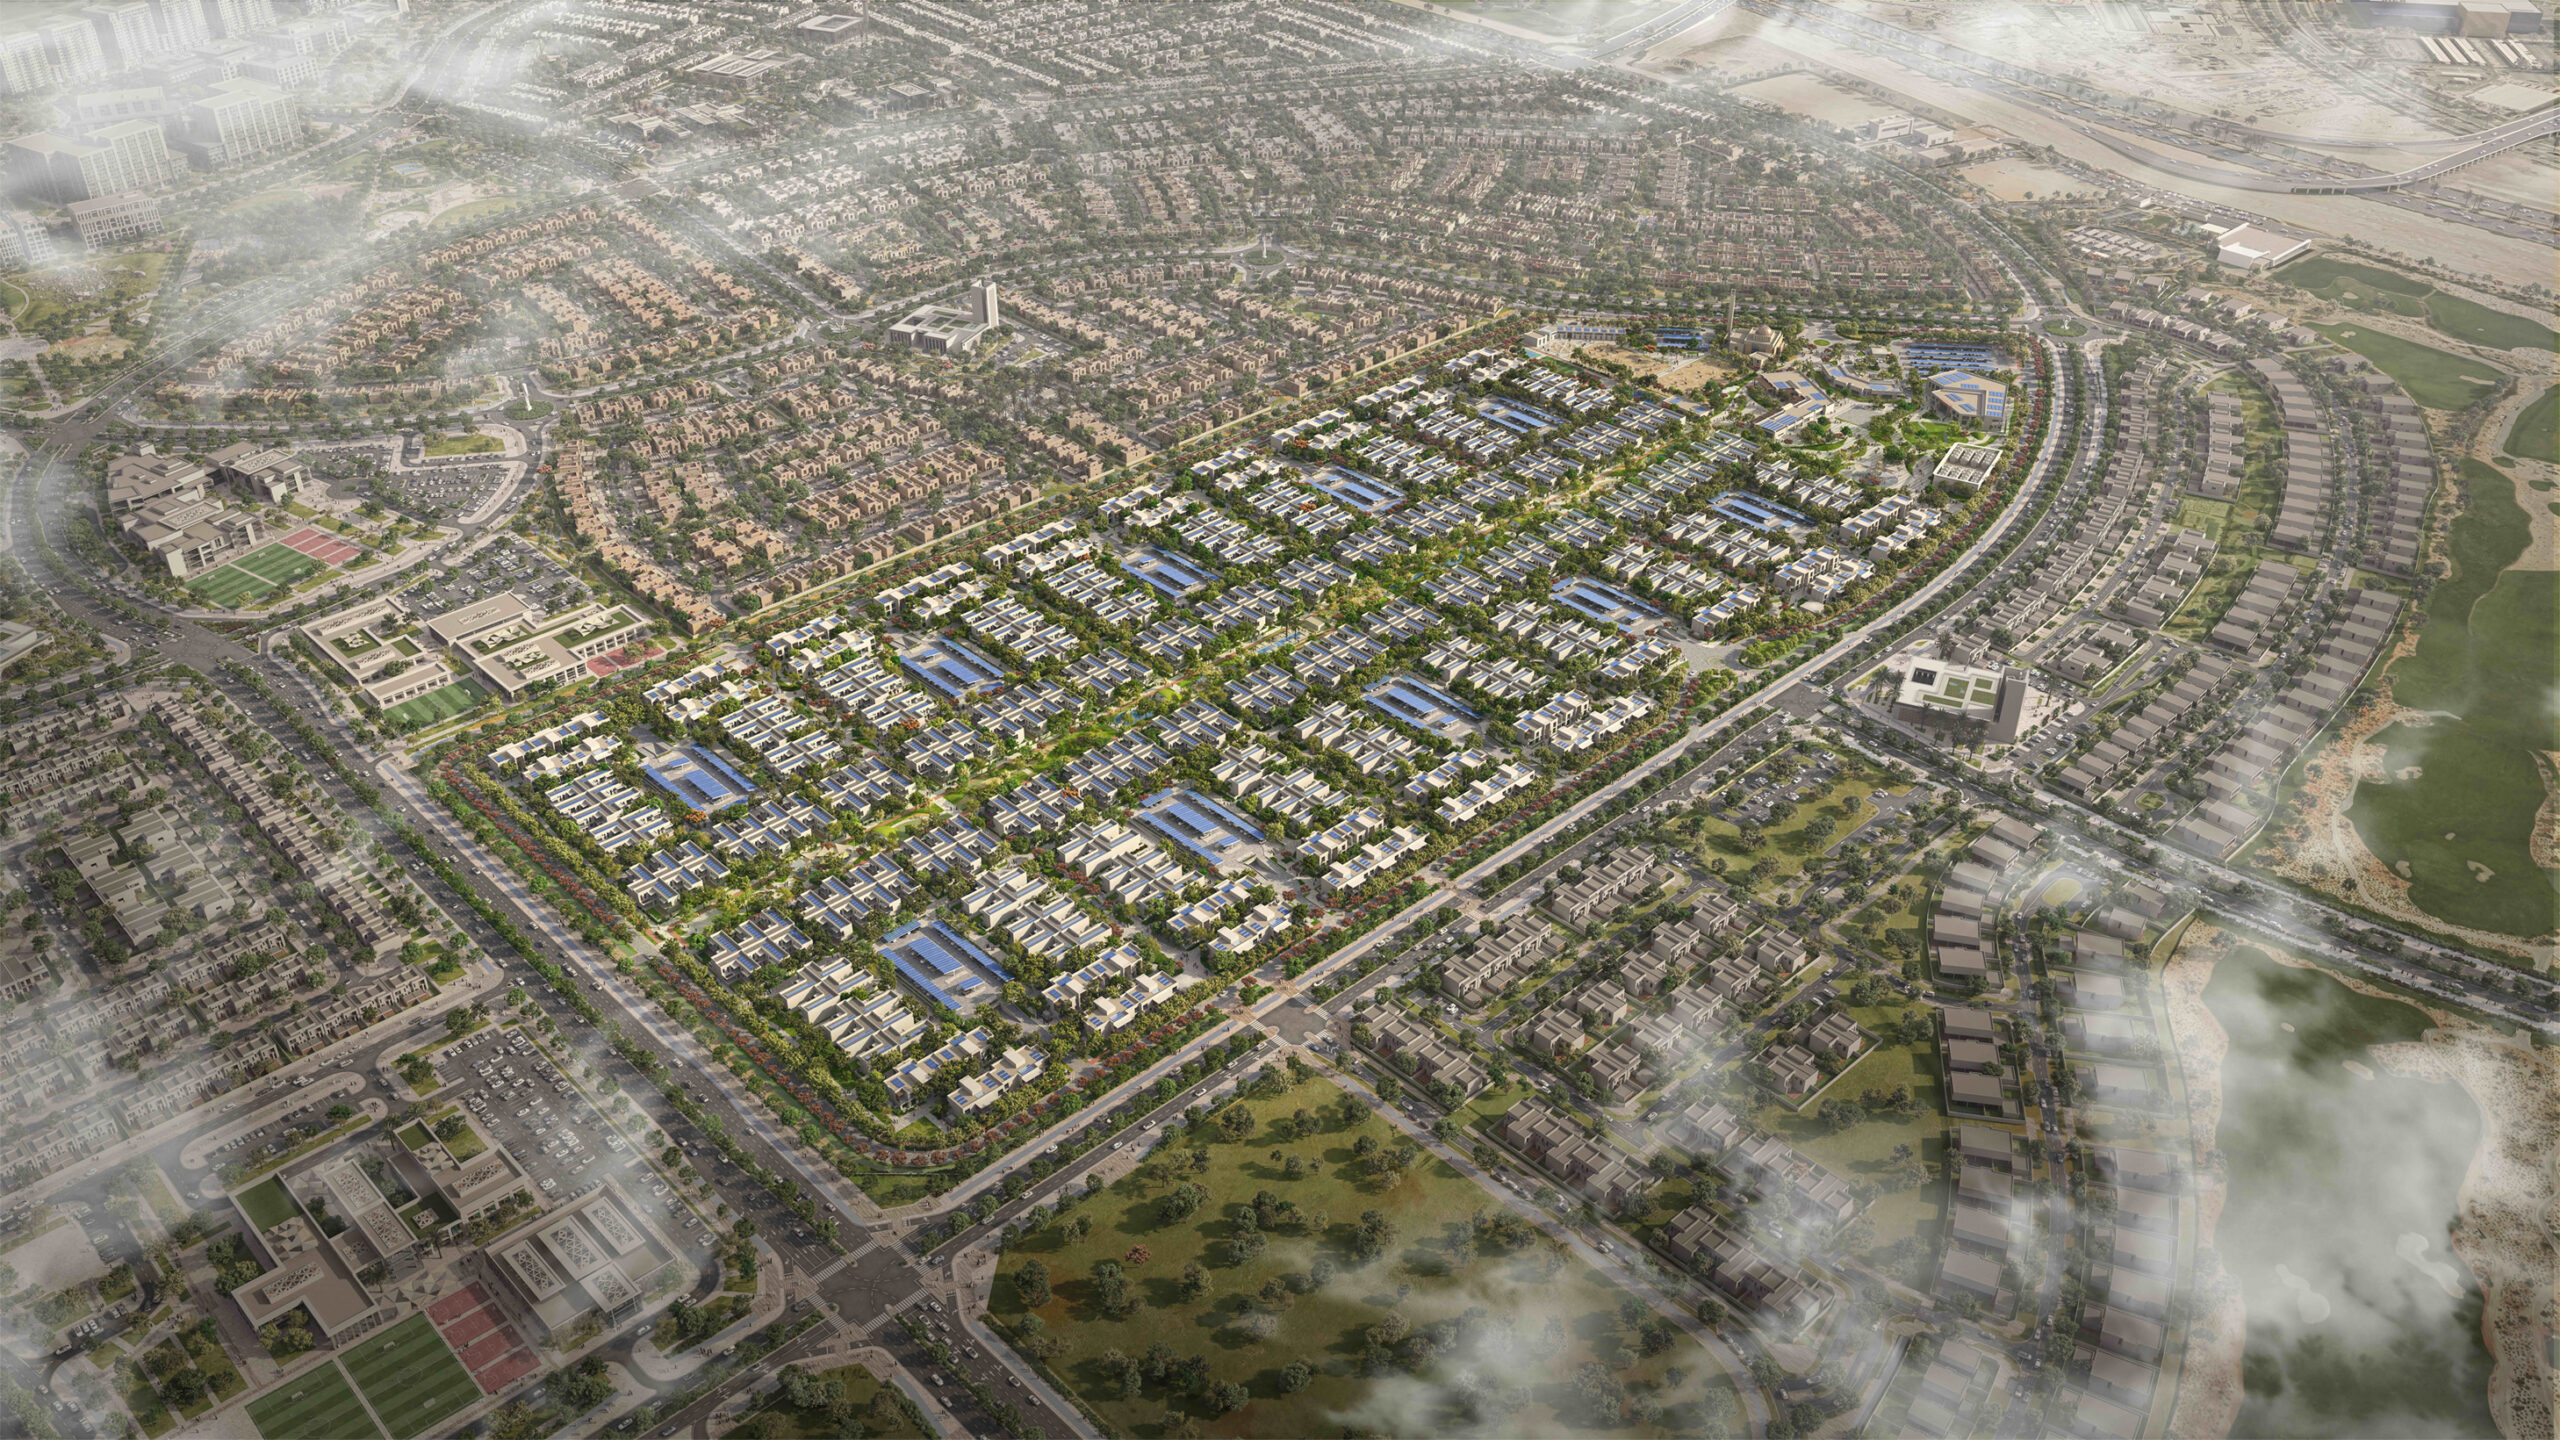 THE SUSTAINABLE CITY – YAS ISLAND ACHIEVES HIGHEST SUSTAINABLE URBAN DESIGN RATING IN ABU DHABI